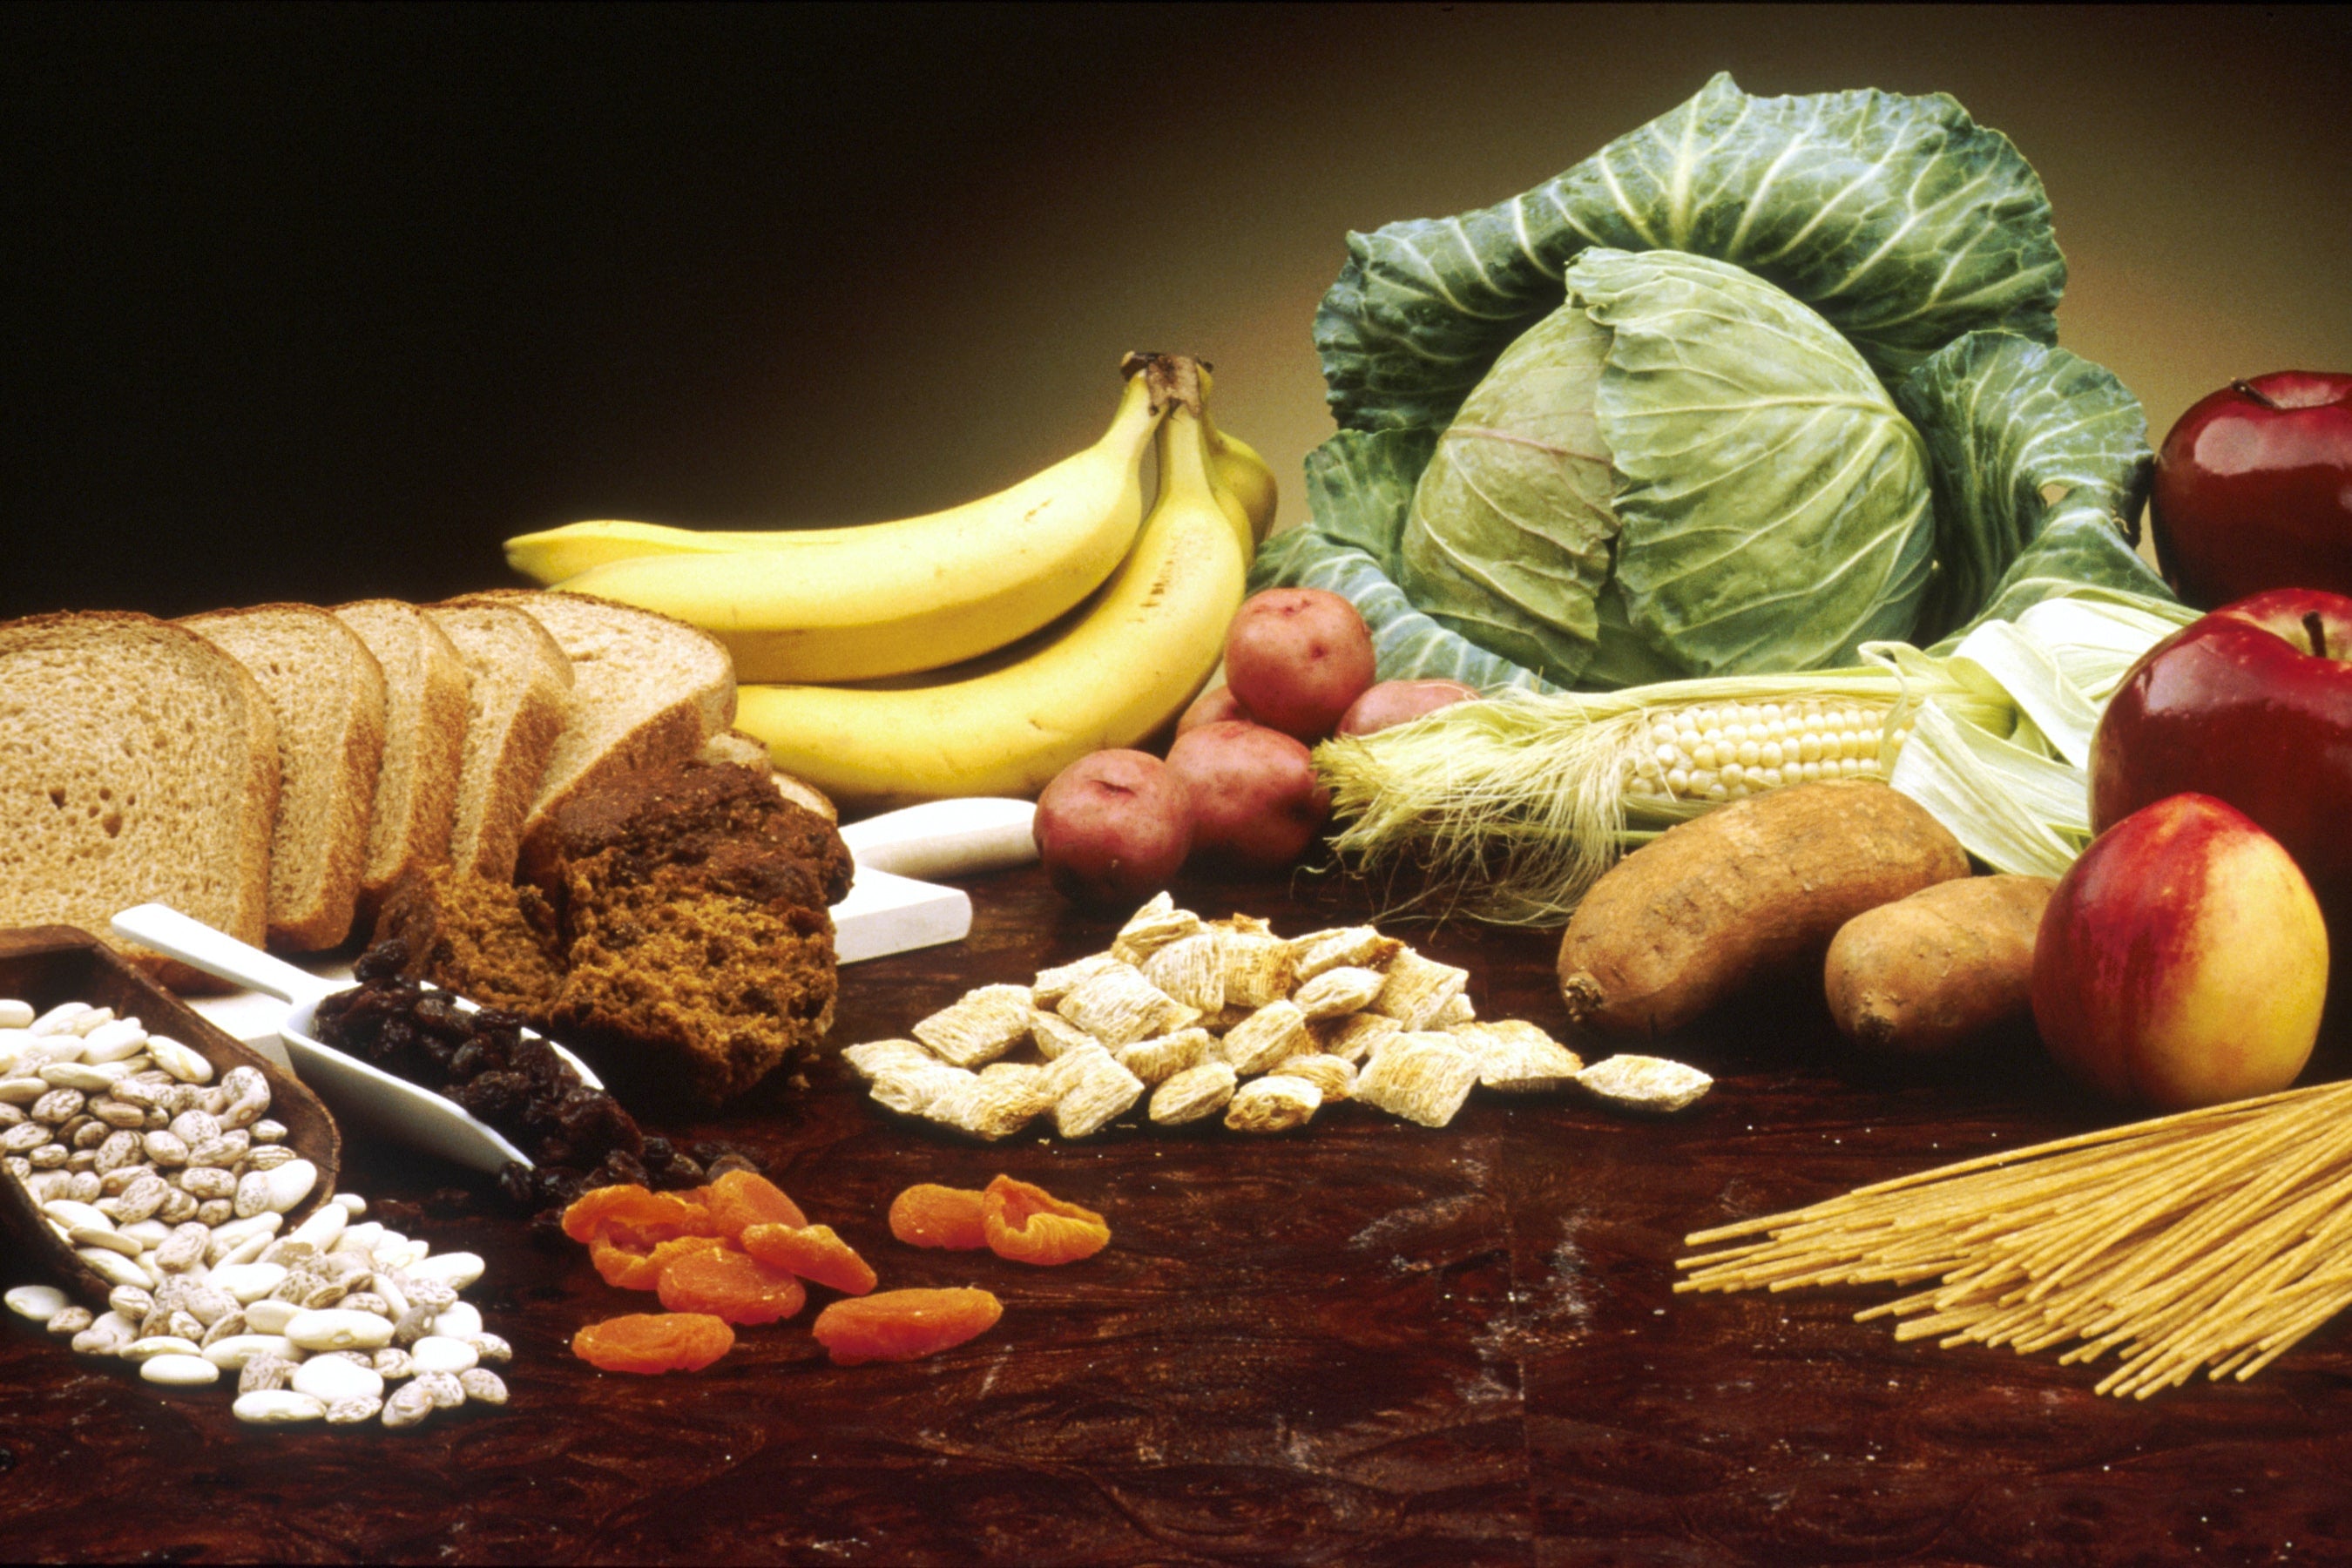 A variety of fiber-rich foods including whole grain bread, muffins, bananas, cabbage, apples, potatoes, corn, dried apricots, beans, raisins, shredded wheat cereal, and spaghetti.